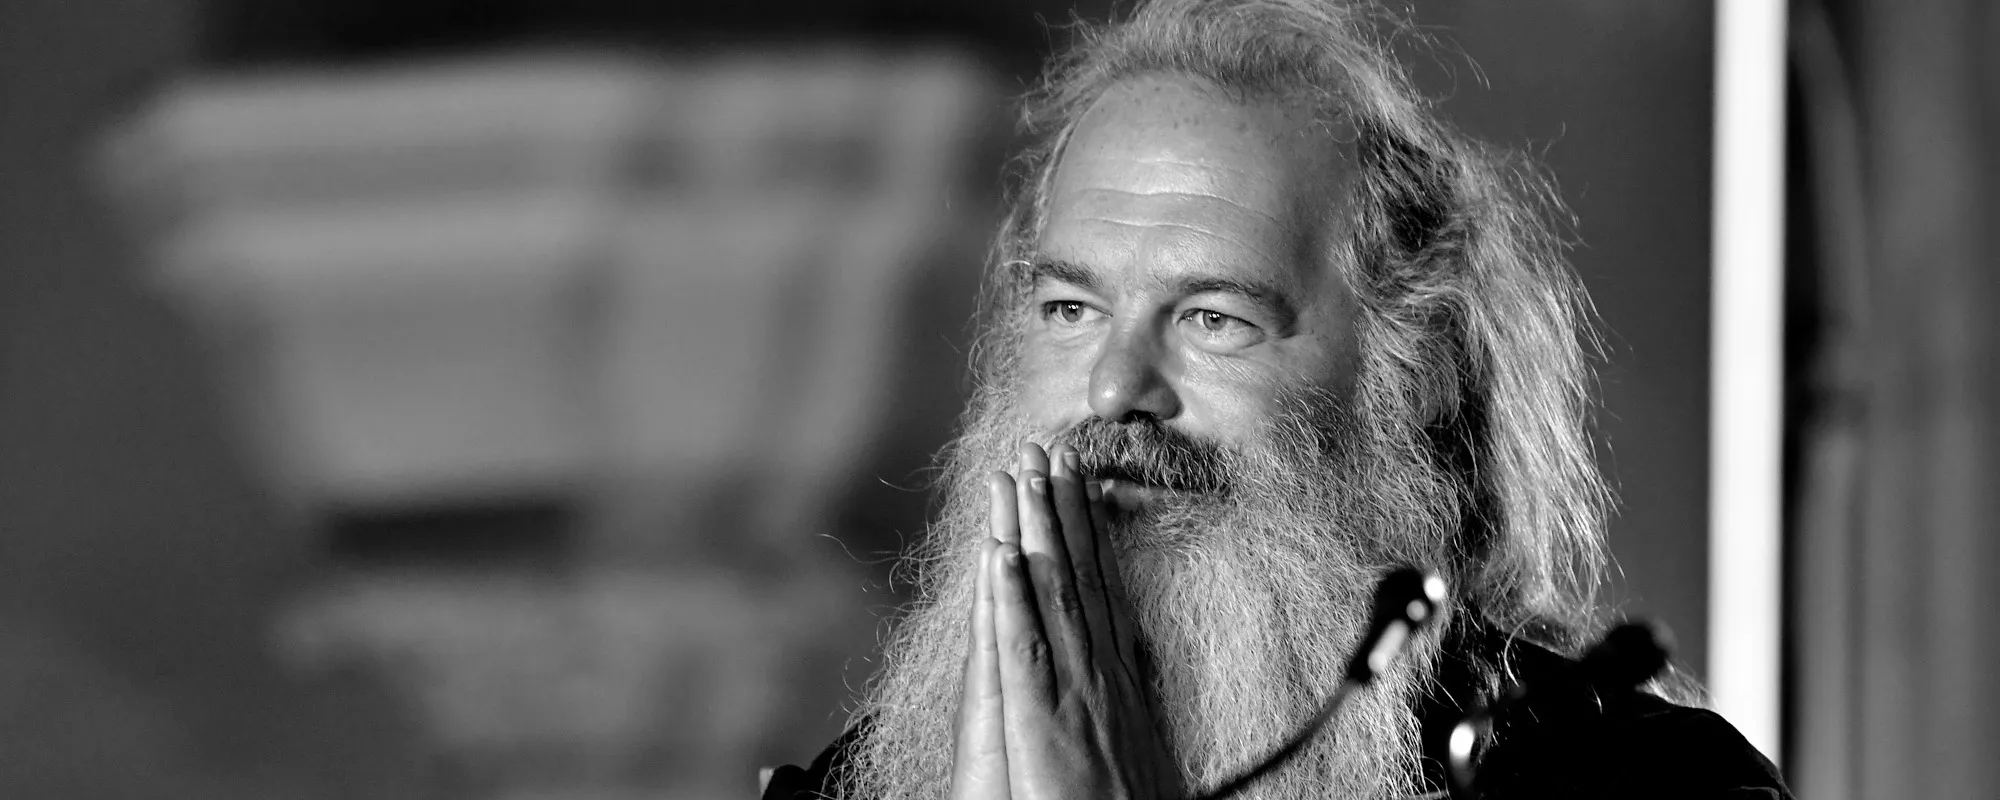 5 Albums You Didn’t Know Rick Rubin Produced